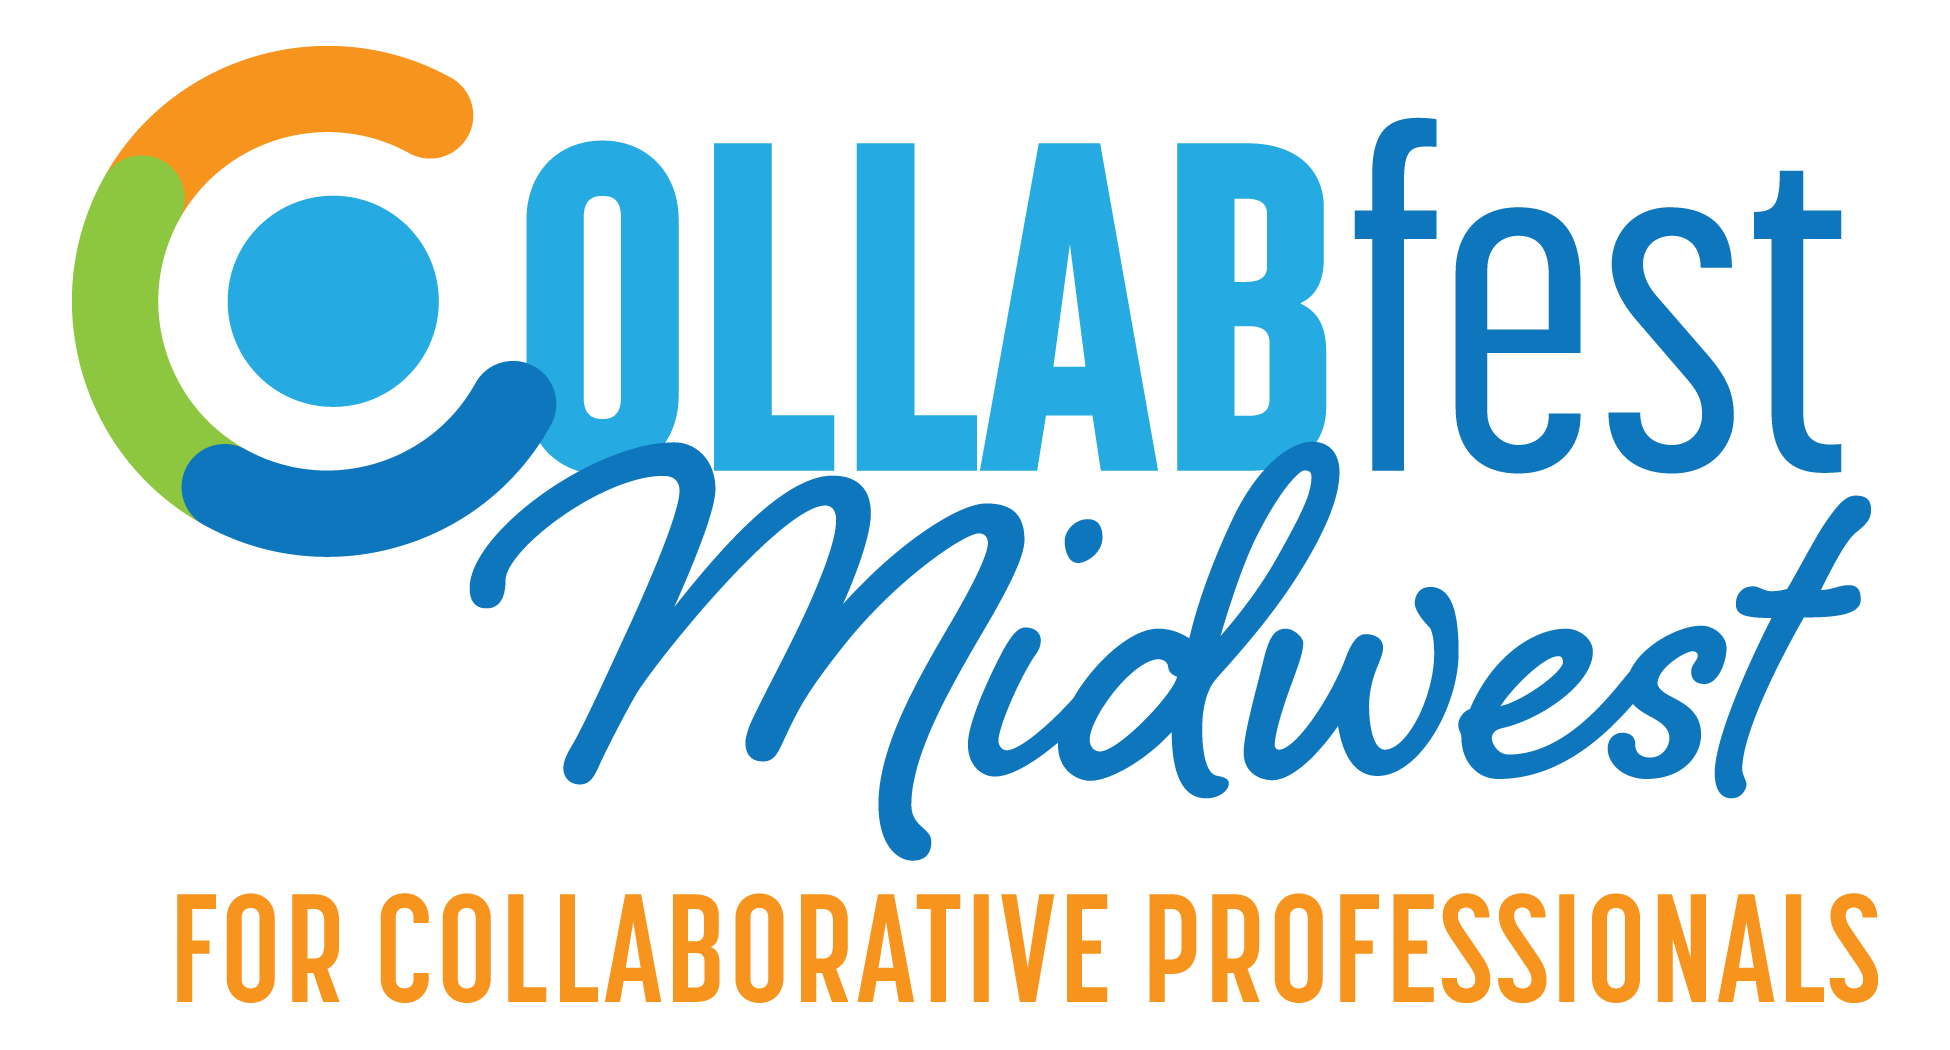 CollabFestMidwest_Logo_Final